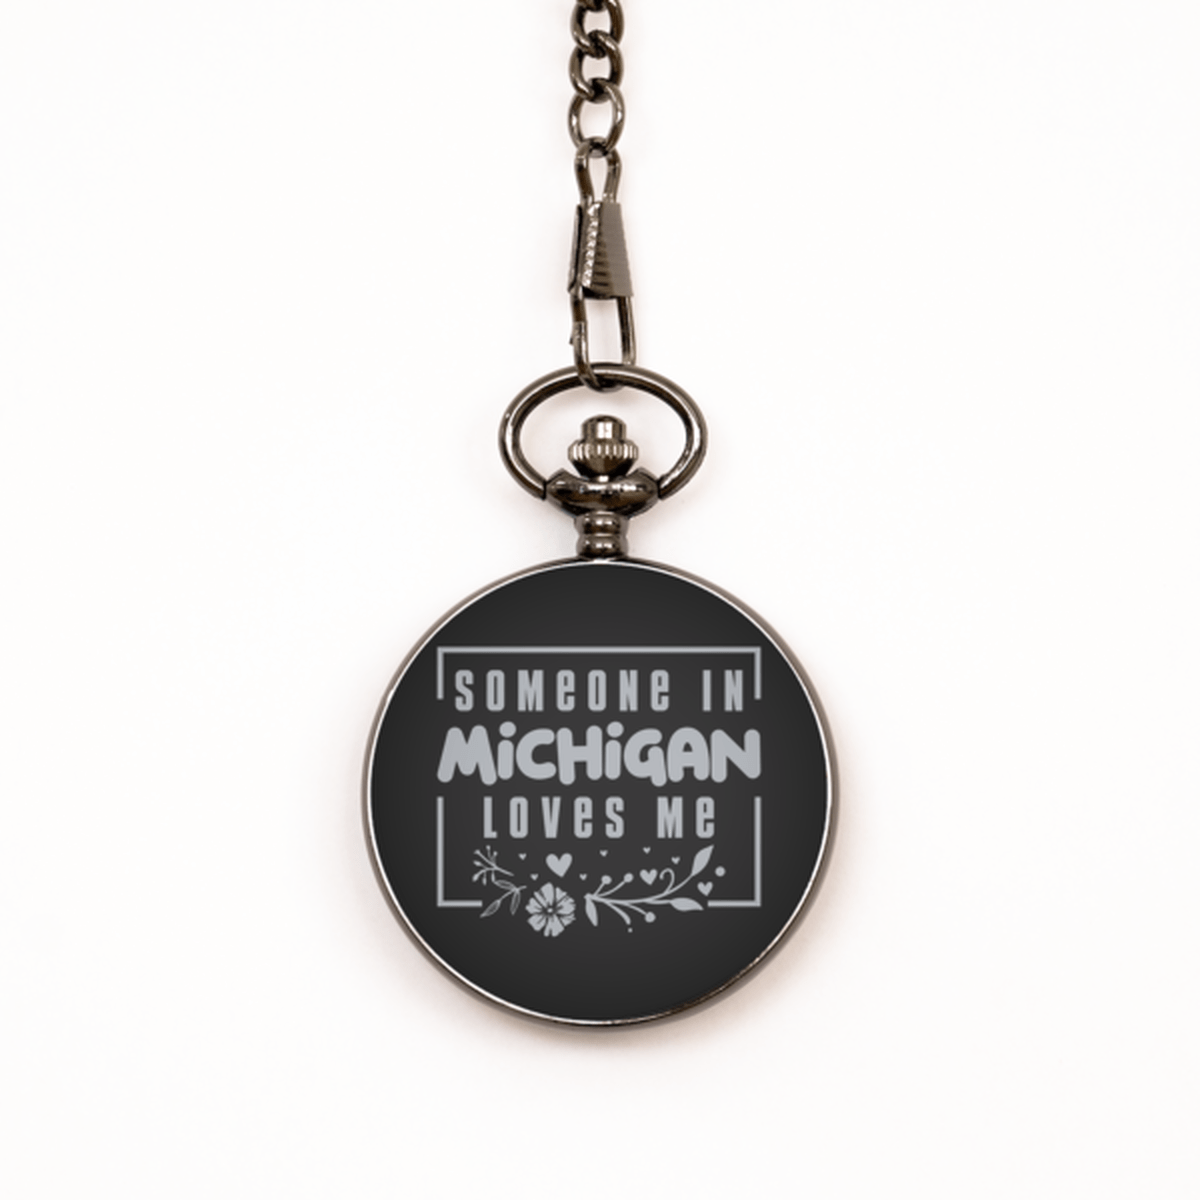 Cute Michigan Black Pocket Watch, Someone in Michigan Loves Me, Best Birthday Gifts from Michigan Friends & Family